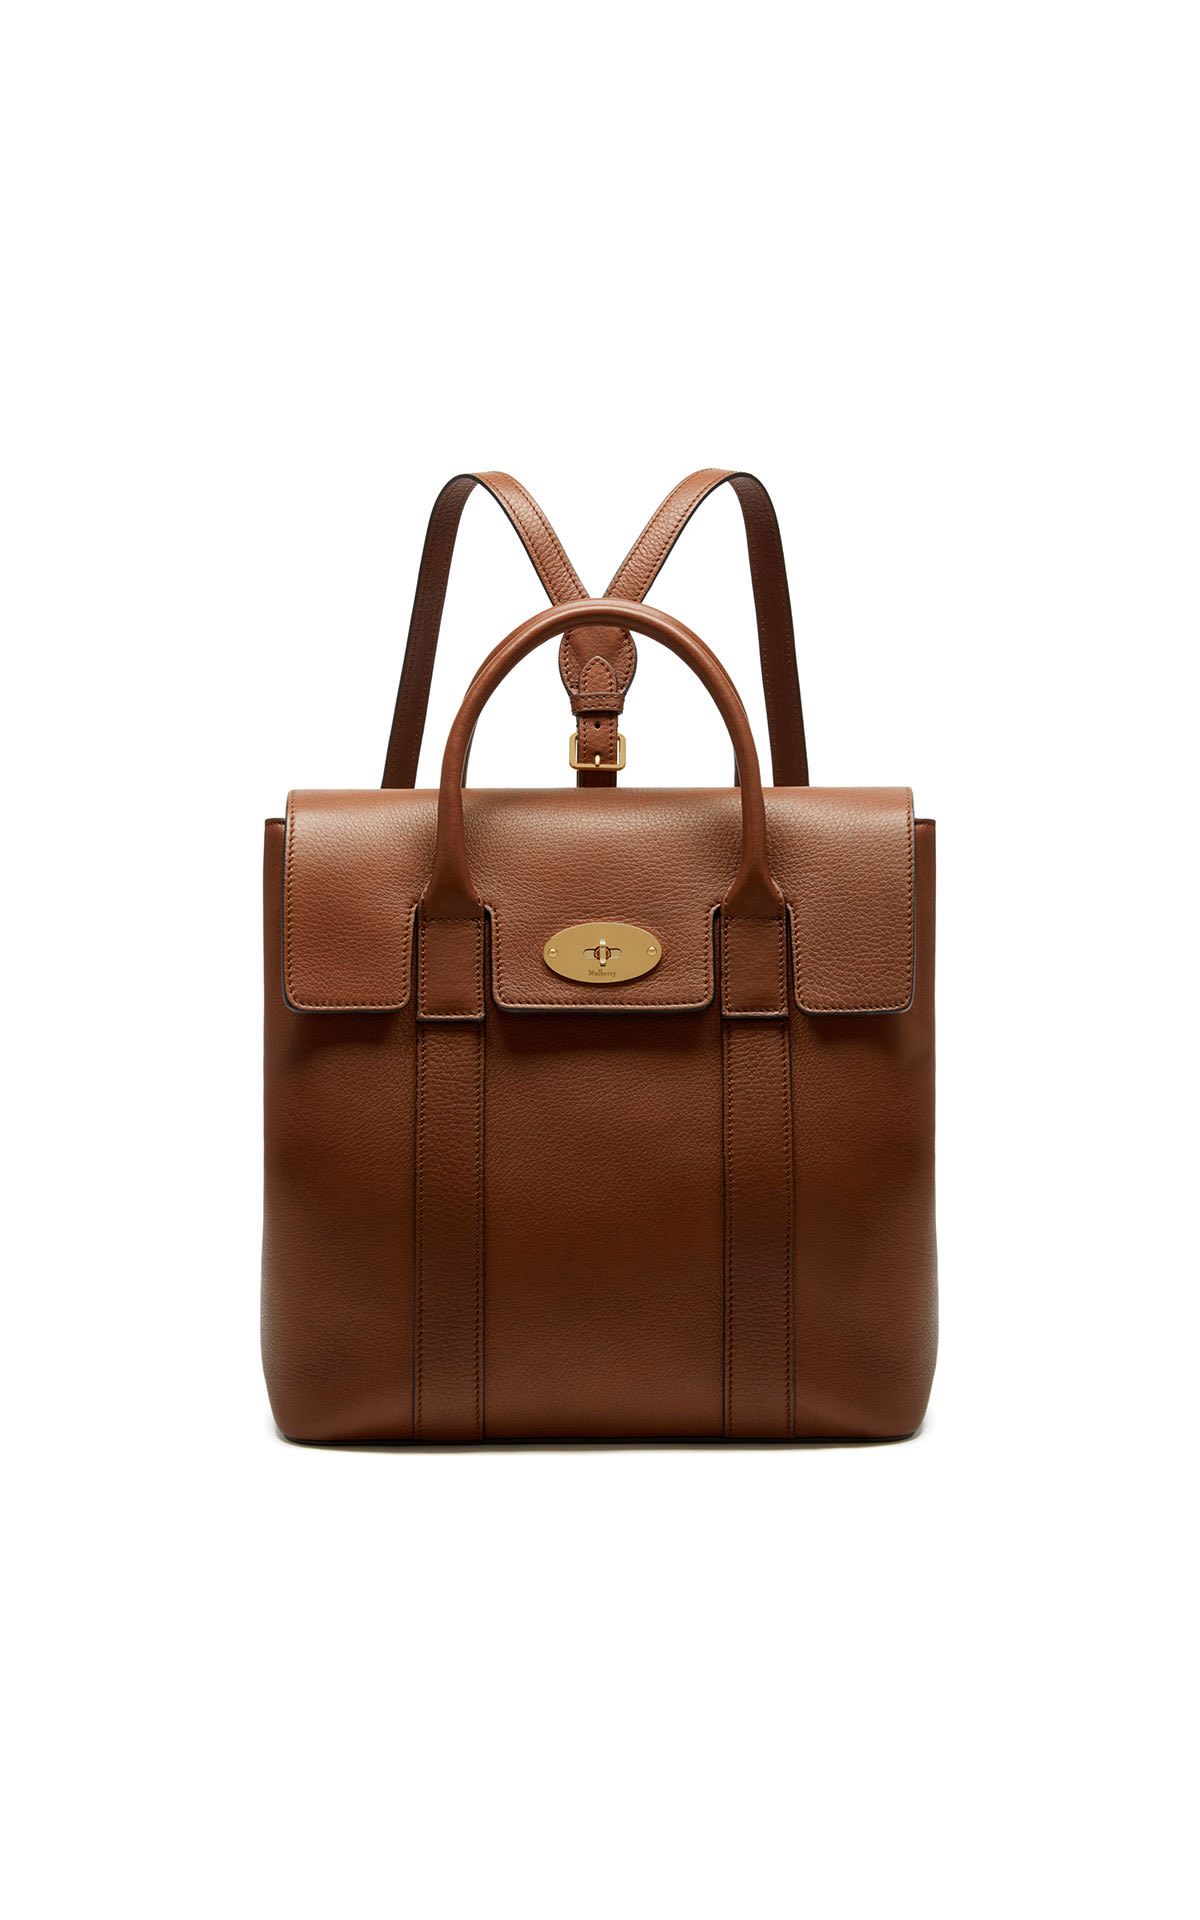 Mulberry Bayswater backpack classic grain from Bicester Village